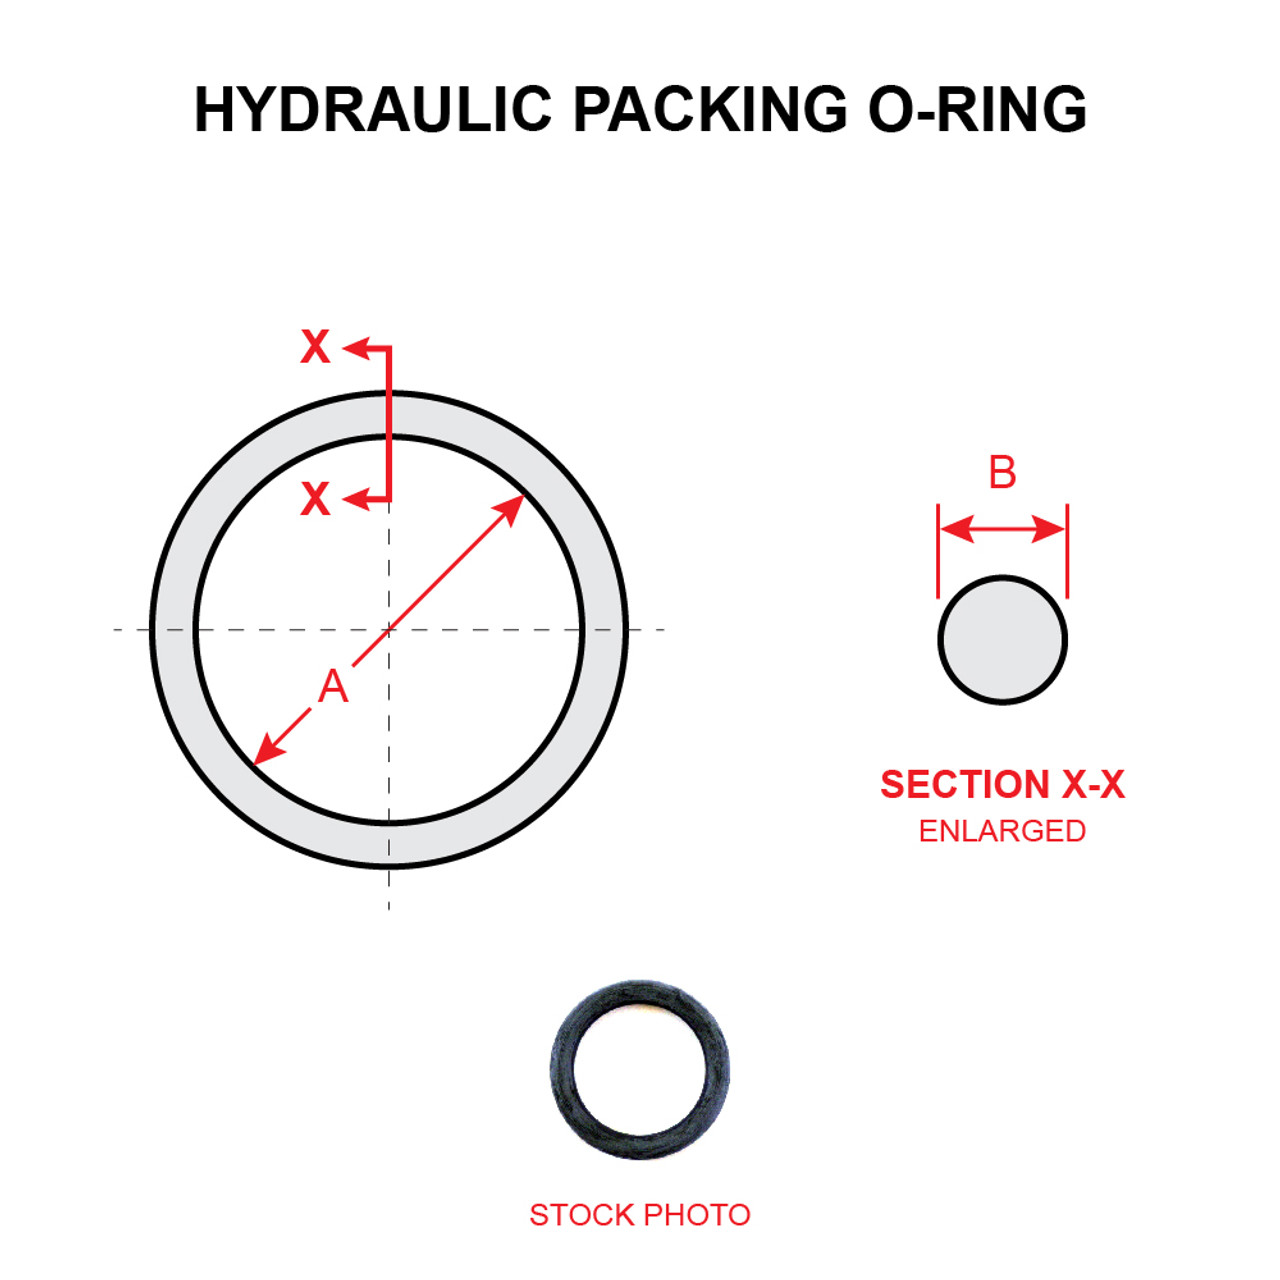 MS28775-332   HYDRAULIC PACKING O-RING